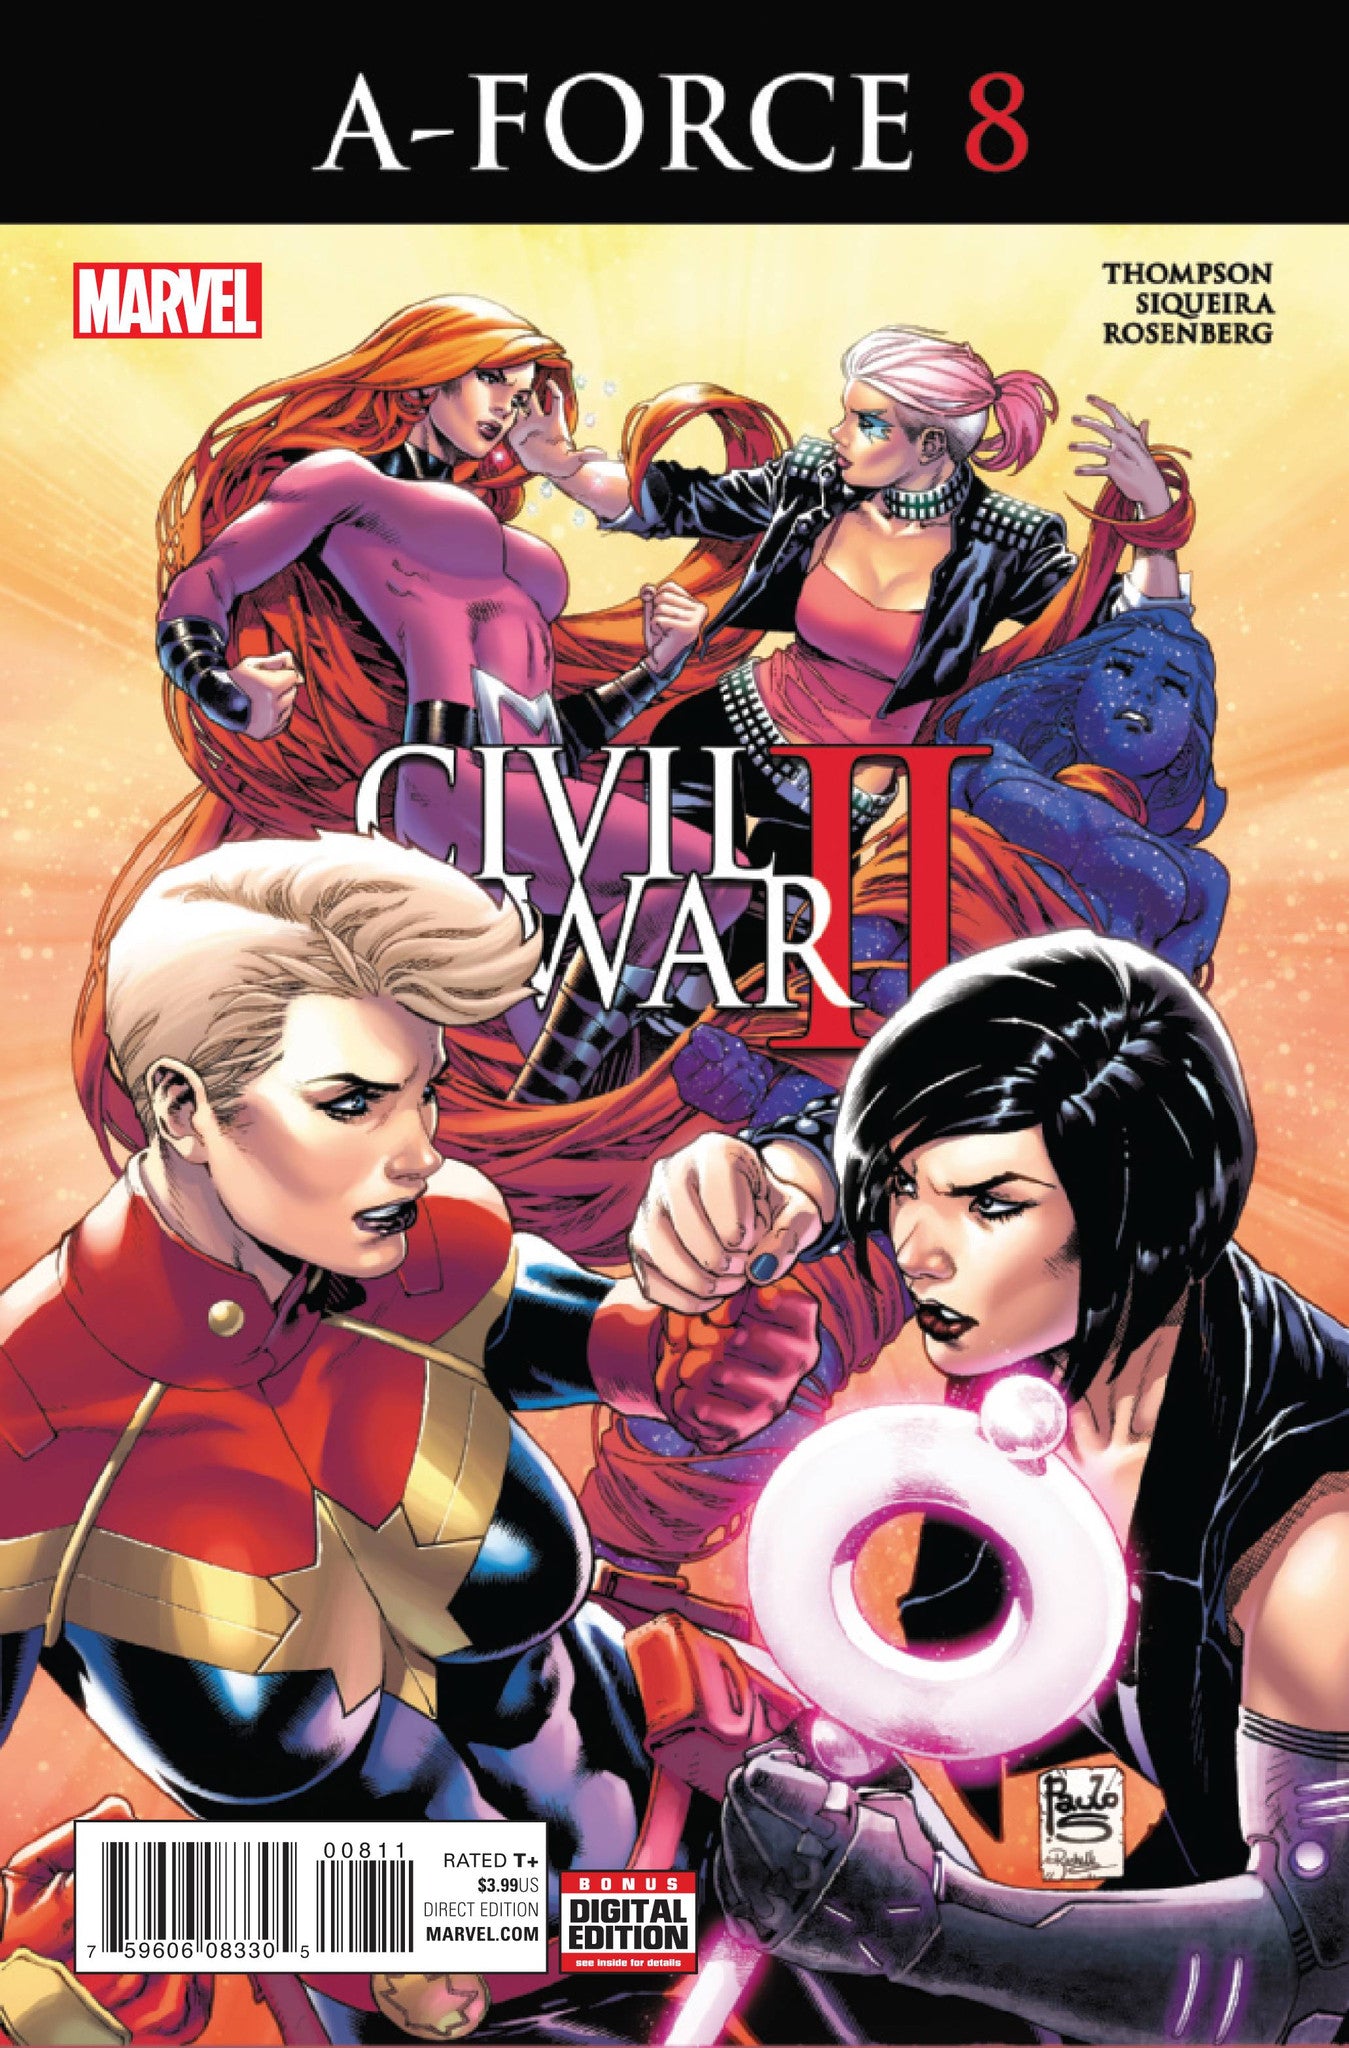 A-FORCE #8 CW2 COVER